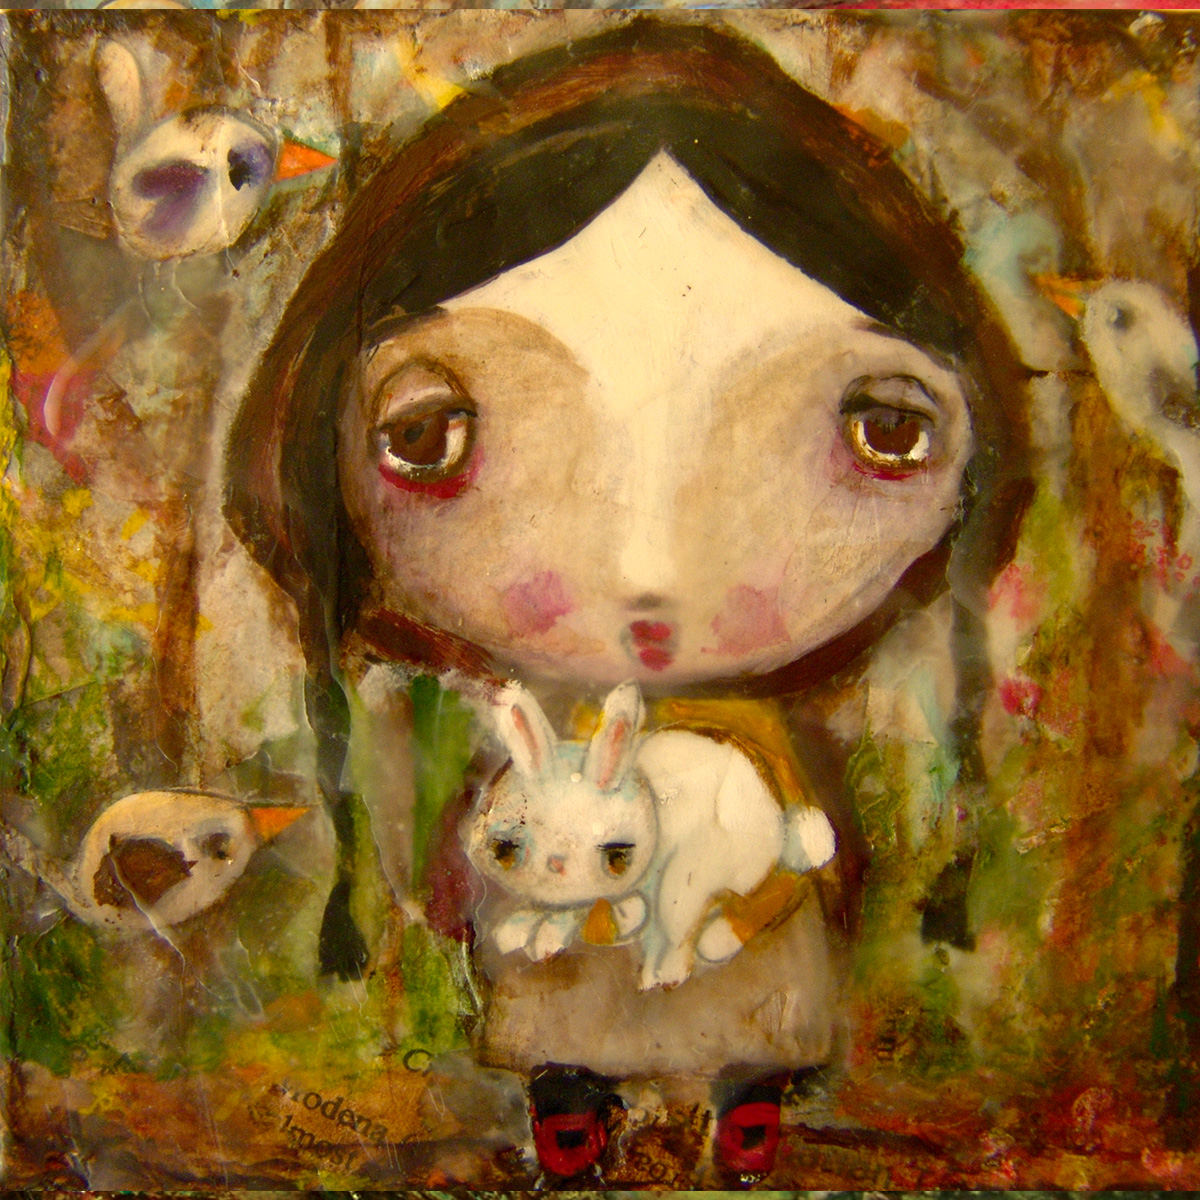 In a clearing in the woods, a young girl holds onto her rabbit. Whimsical style painting